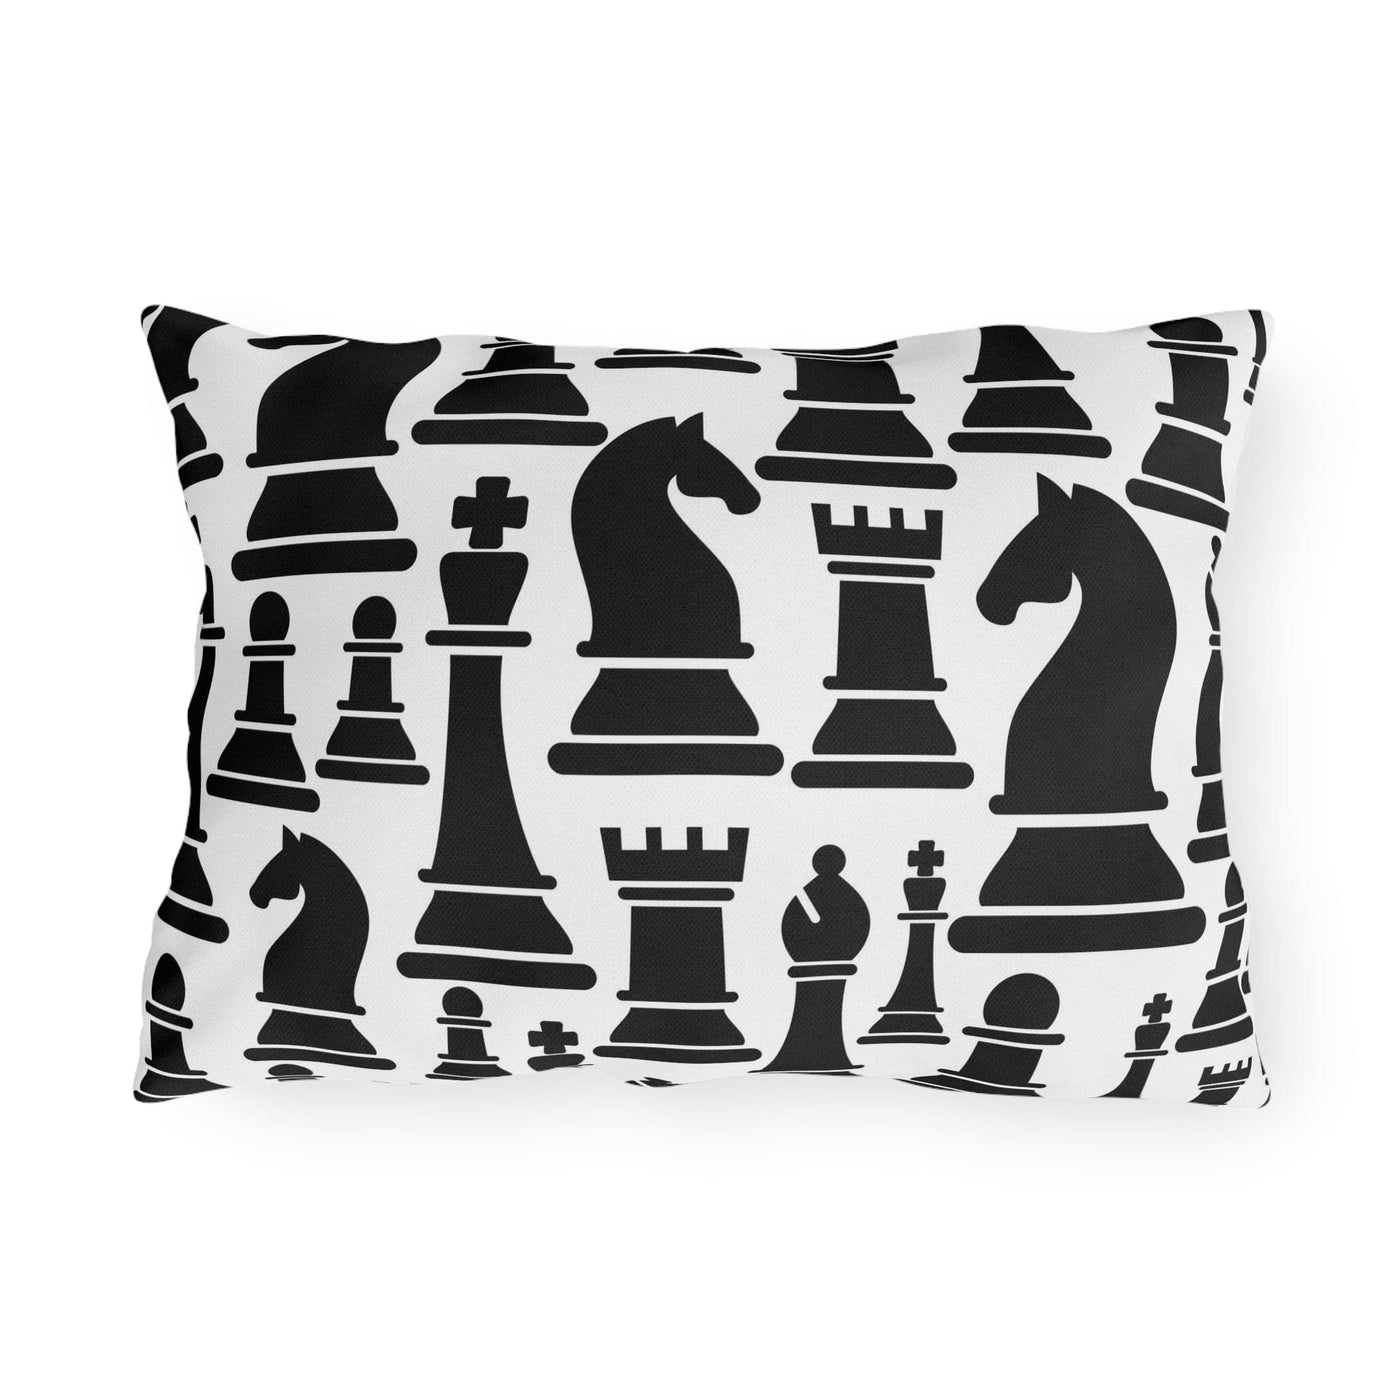 Decorative Outdoor Pillows - Set Of 2 Black And White Chess Print | Throw Indoor